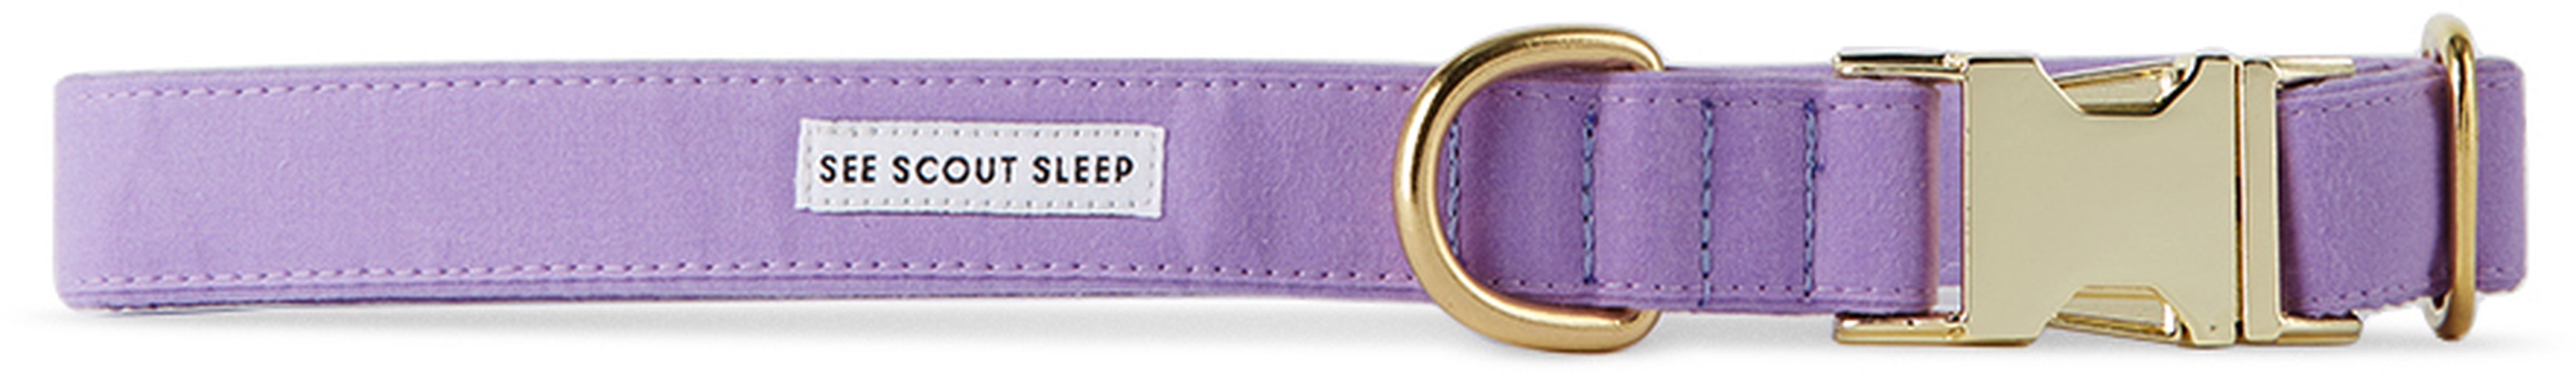 See Scout Sleep Purple The Scot Large Standard Dog Collar